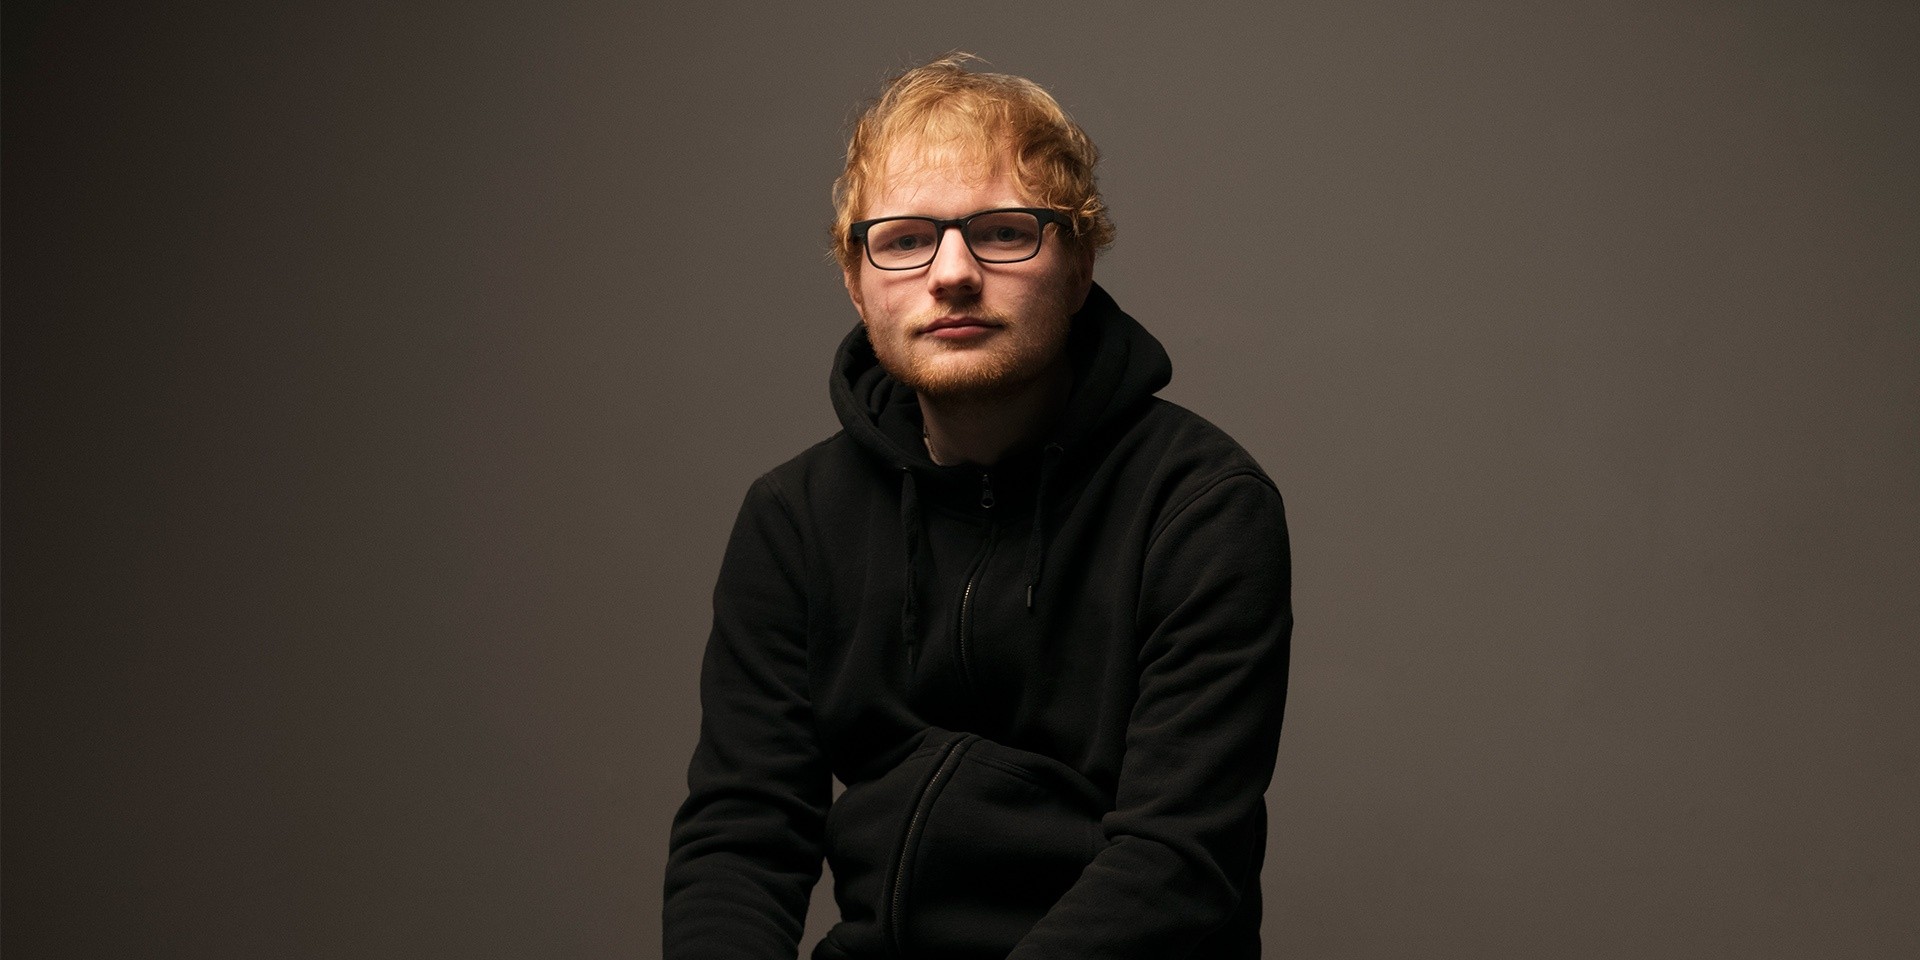 Ed Sheeran will be coming to Singapore this year